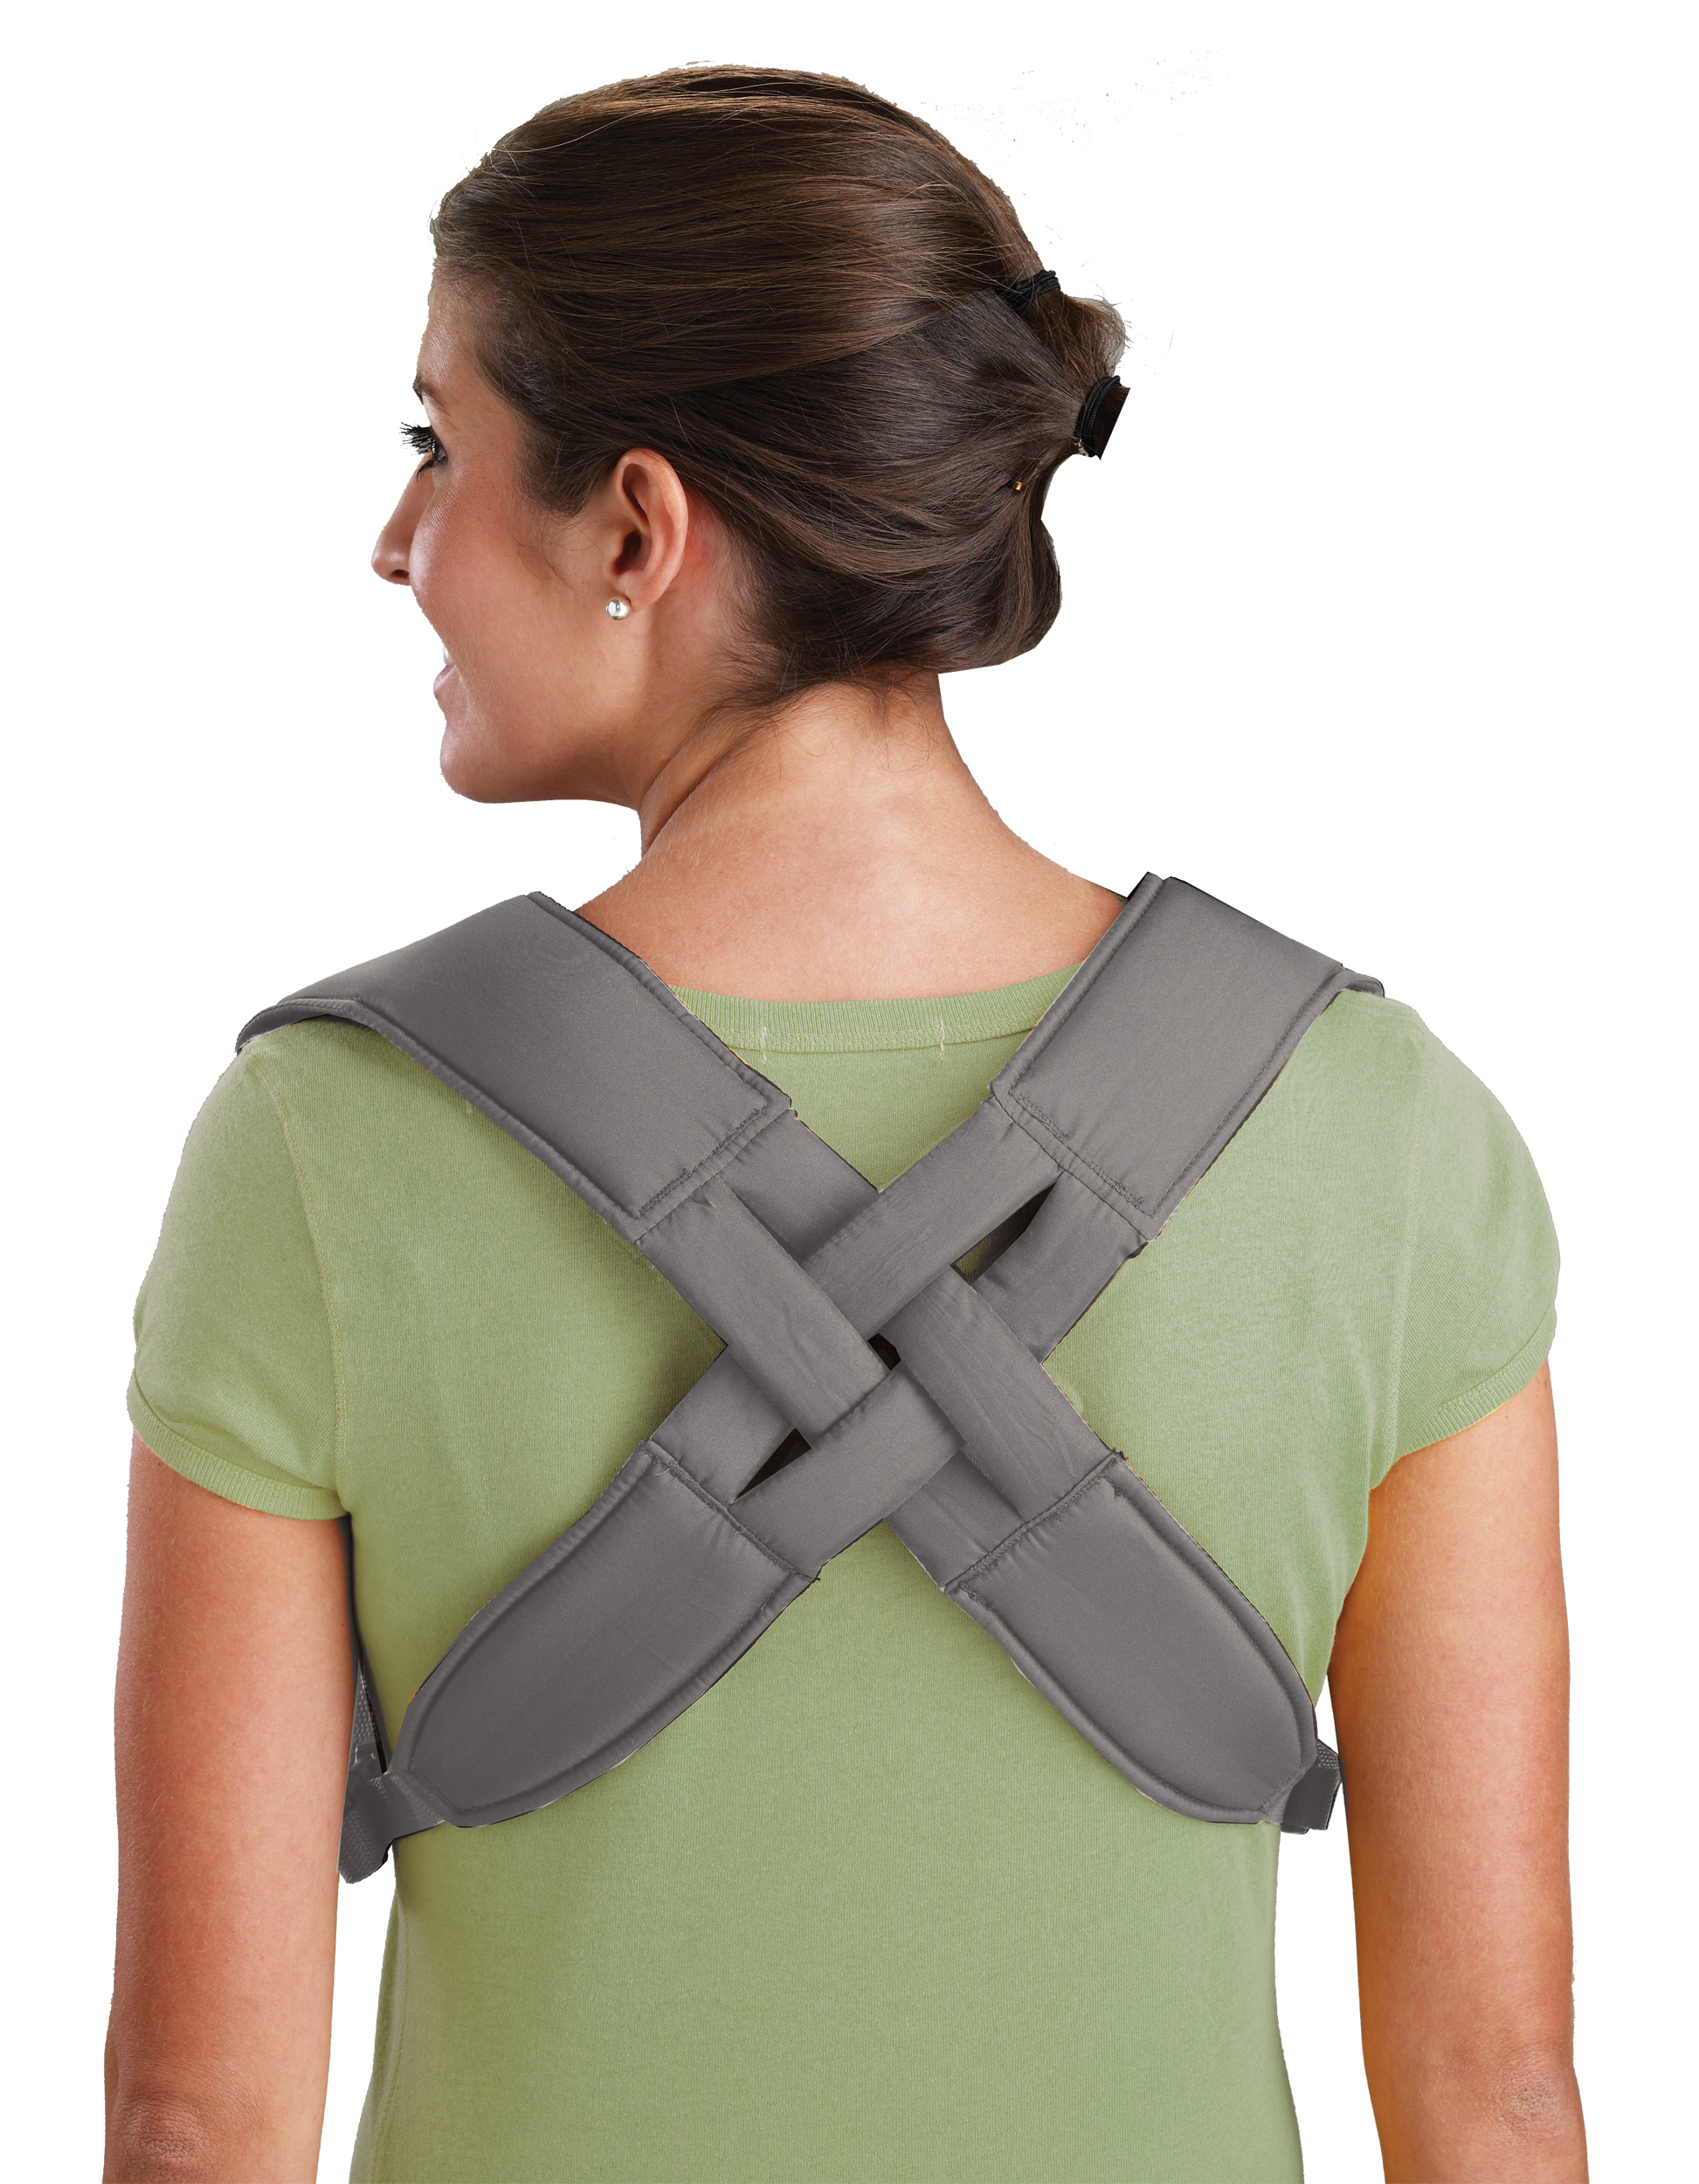 Breathable Infant Carrier (Marianna Pink) - image 5 of 7